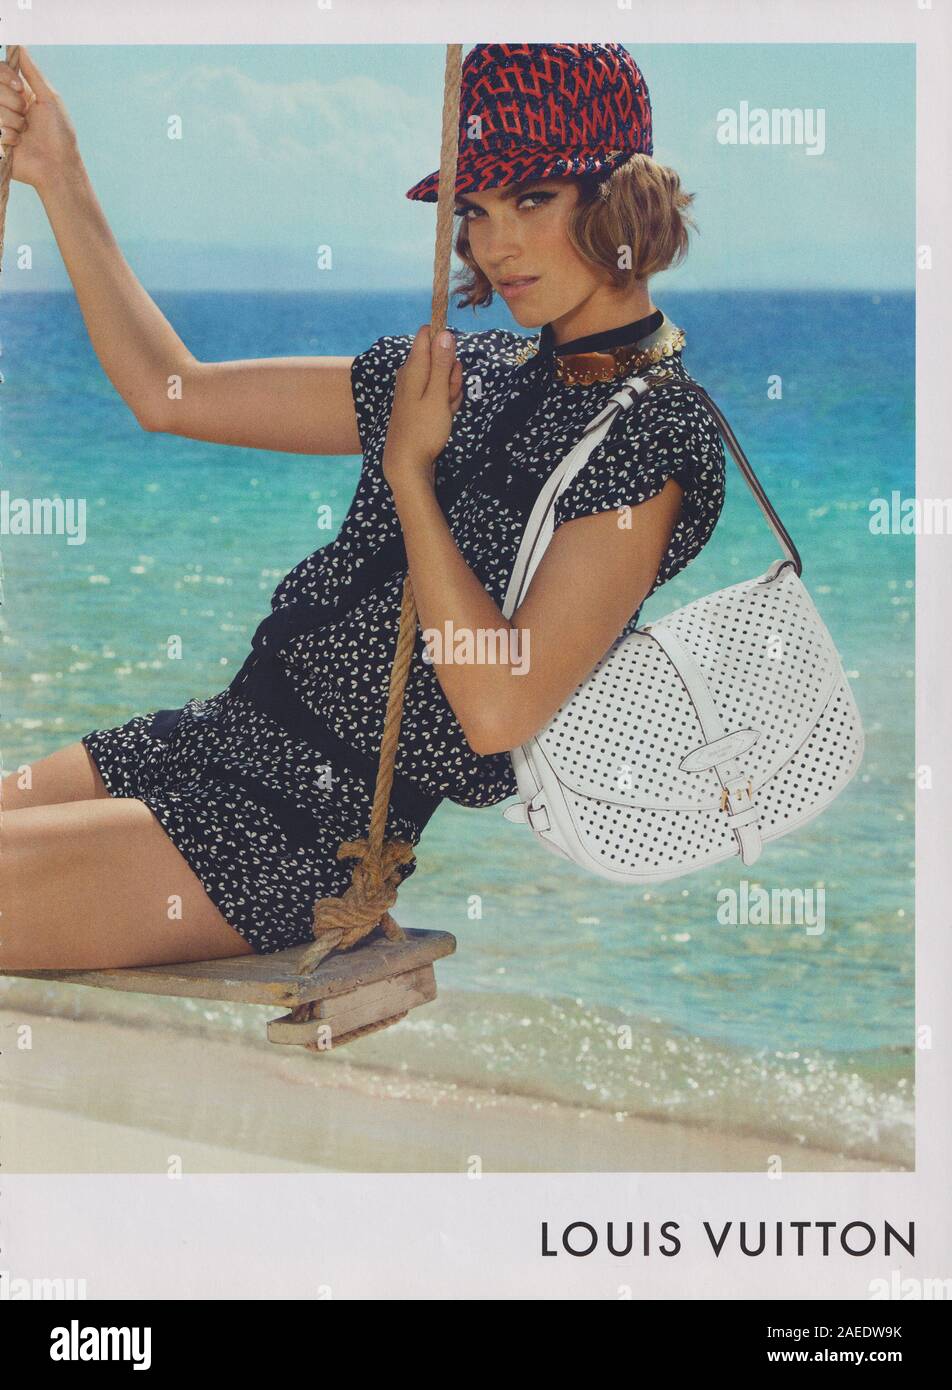 poster advertising Louis Vuitton handbag in paper magazine from 2012 year, advertisement, creative LV Louis Vuitton advert from 2010s Stock Photo